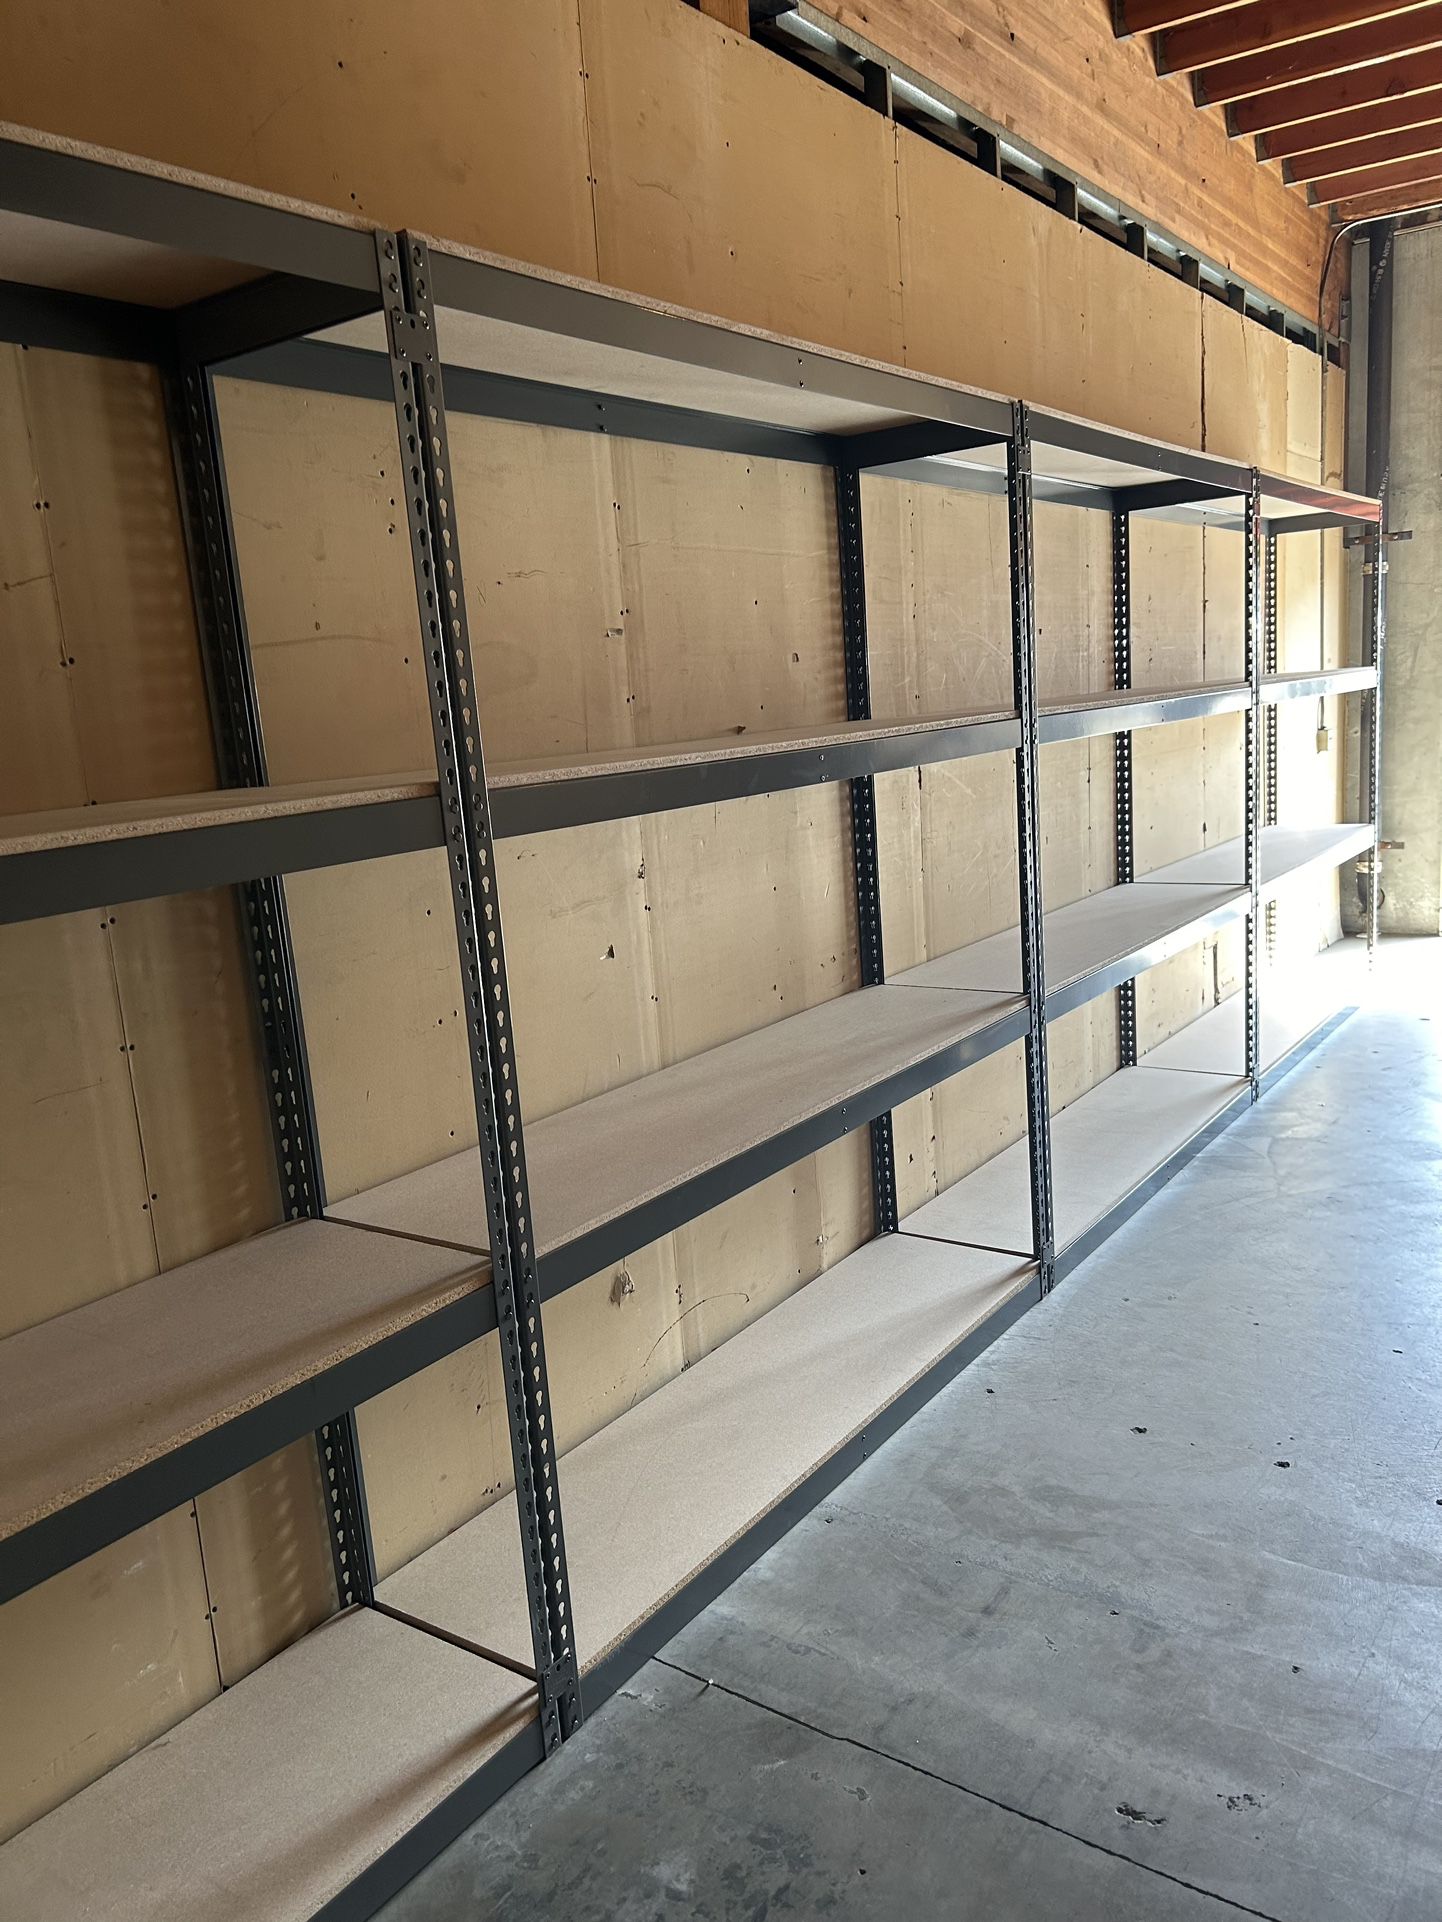 Shelving 72 in W x 18 in D Industrial Boltless Warehouse Storage Racks Stronger Than Homedepot Lowes Delivery Available